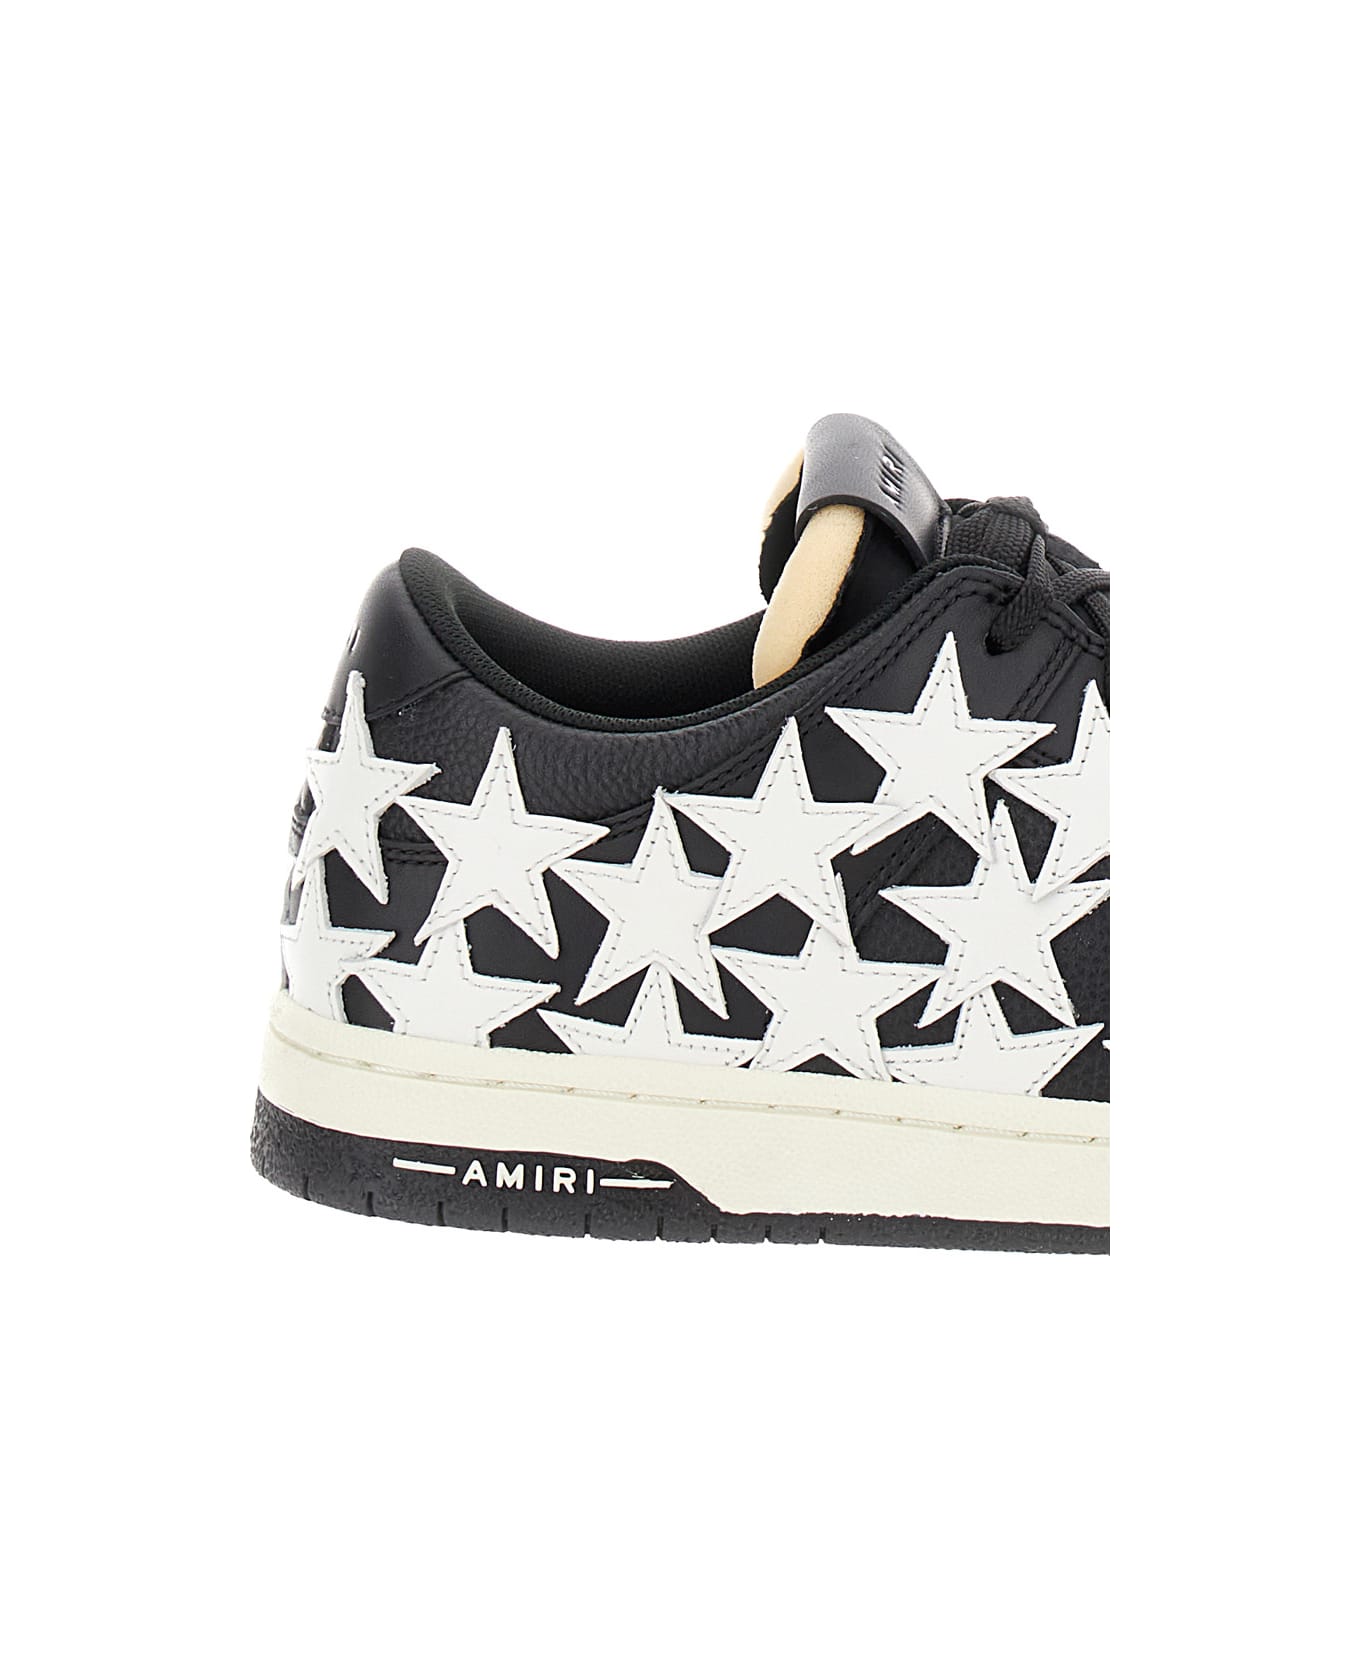 AMIRI 'stars Court' Black And White Low Top Sneakers With Star Patches In Leather Man - Black スニーカー